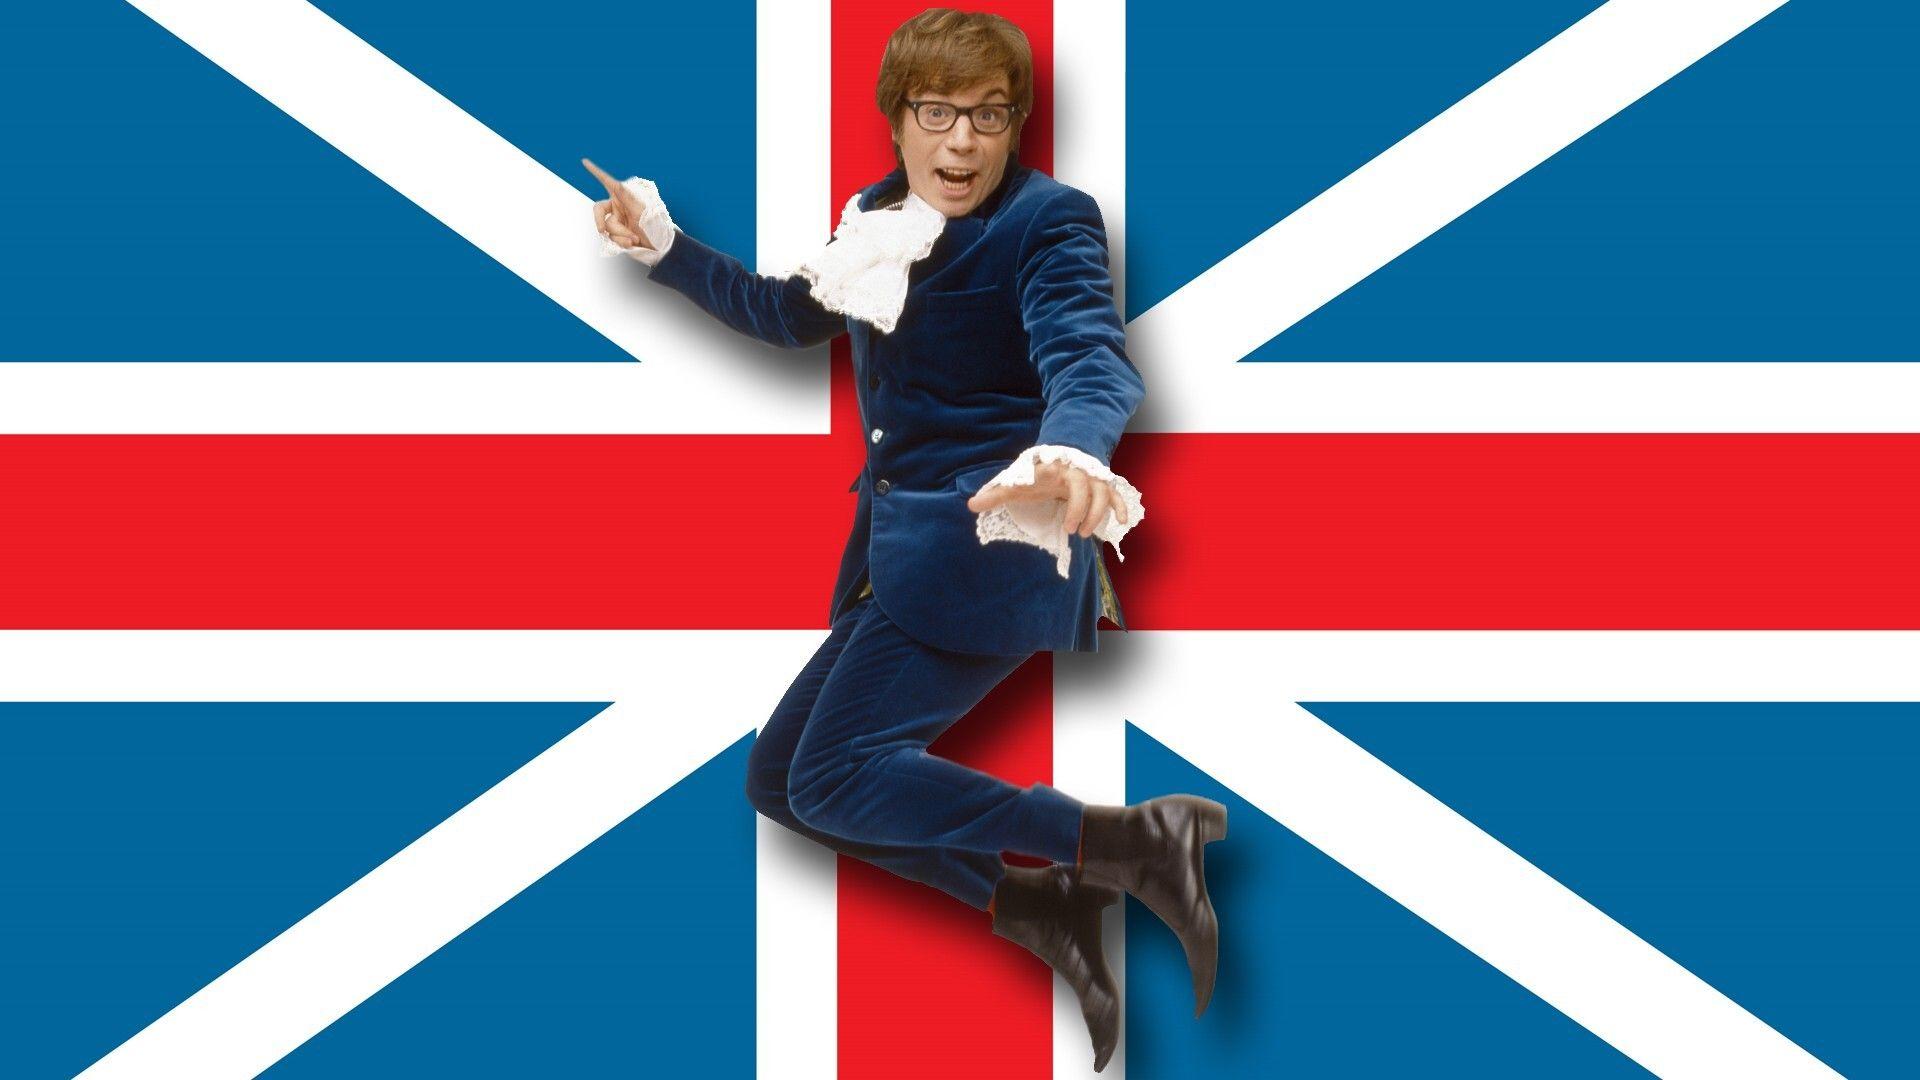 HD wallpaper Austin Powers Mike Myers movies  Wallpaper Flare